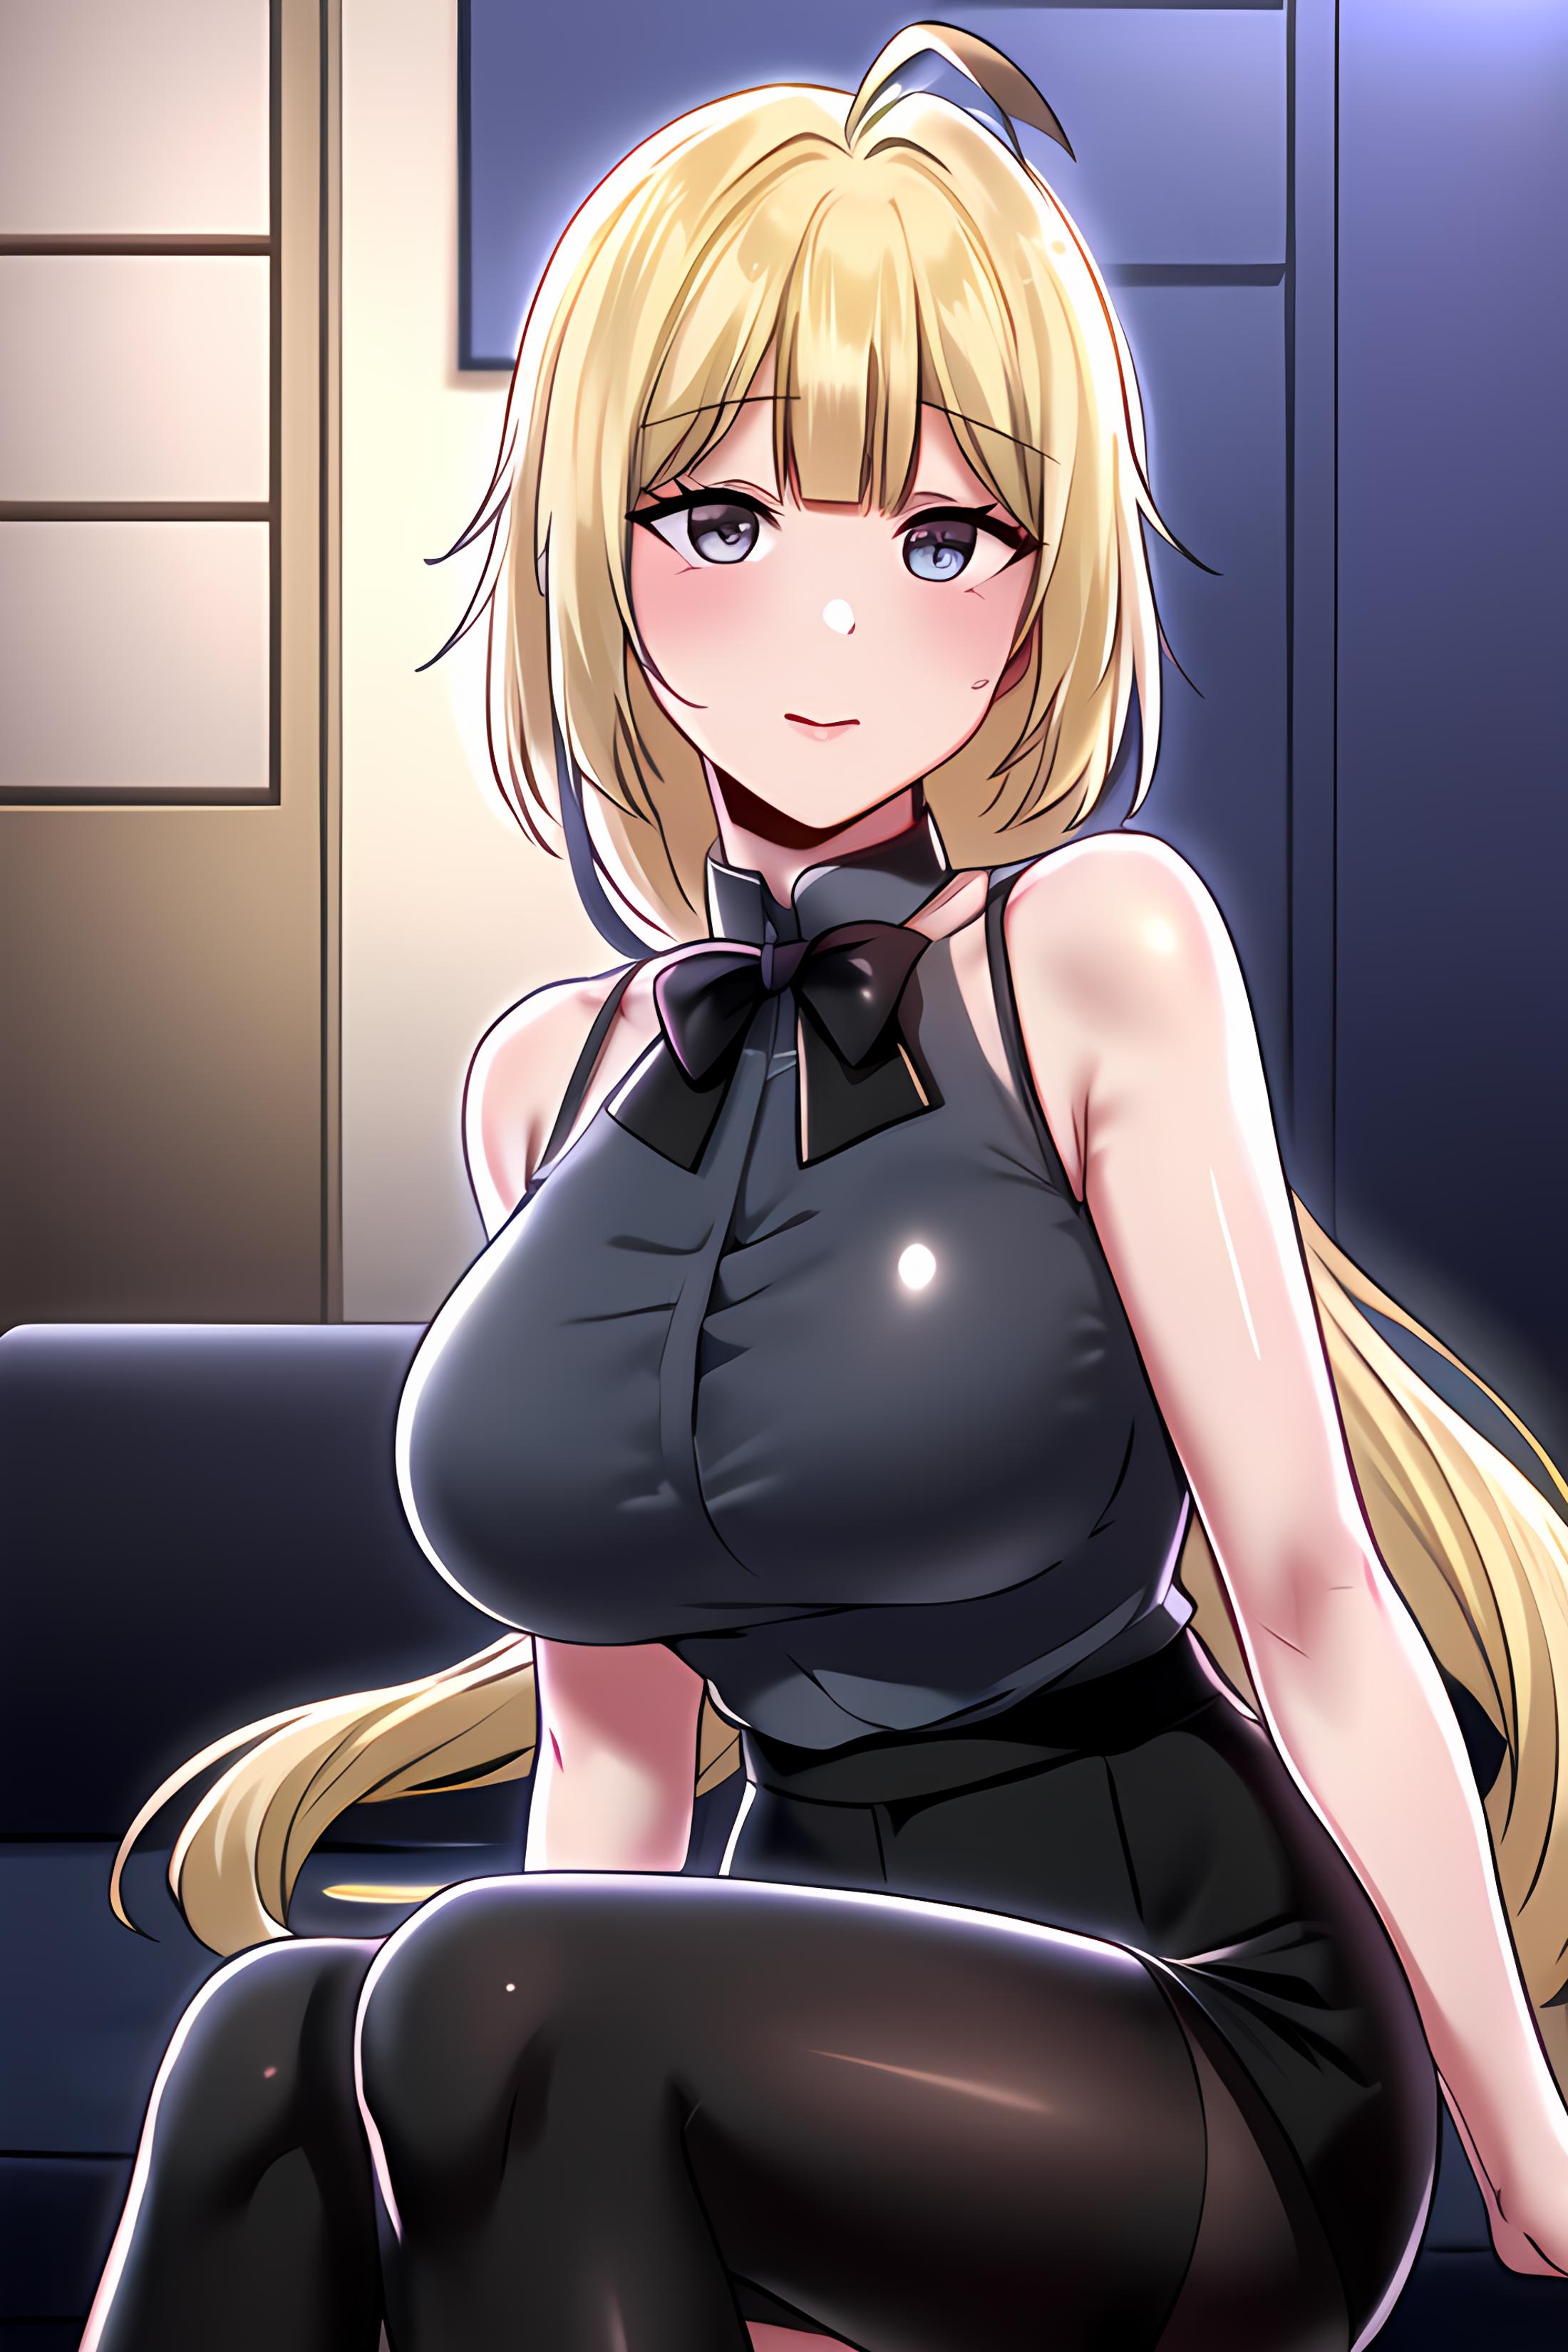 Scarlet (Trapped in the Academy’s Eroge) image by Nena